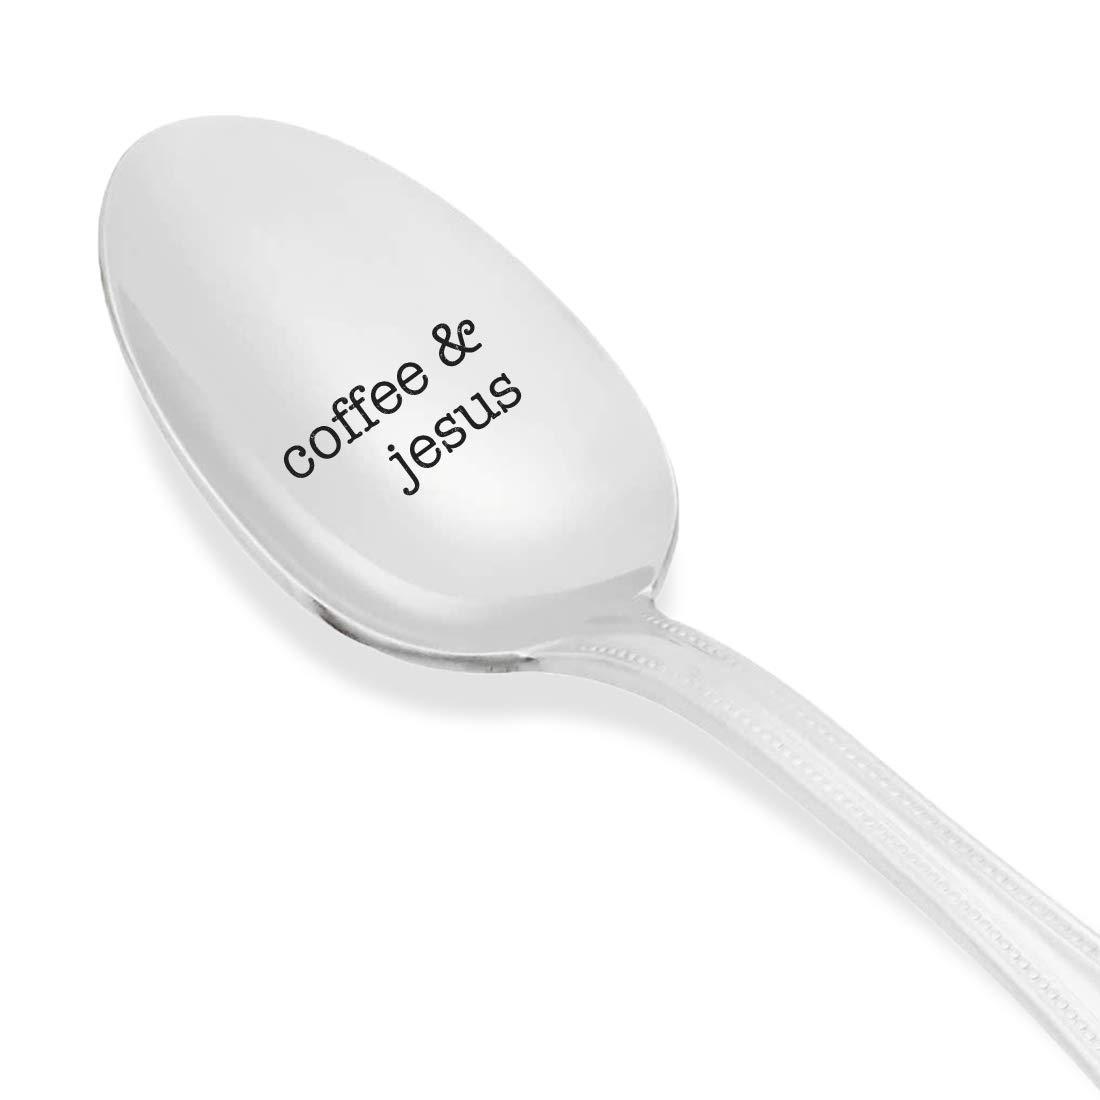 signatives coffee jesus engraved spoon - christian gifts for her - pastor gift idea - inspirational kitchen spoon - religious spoon - ke